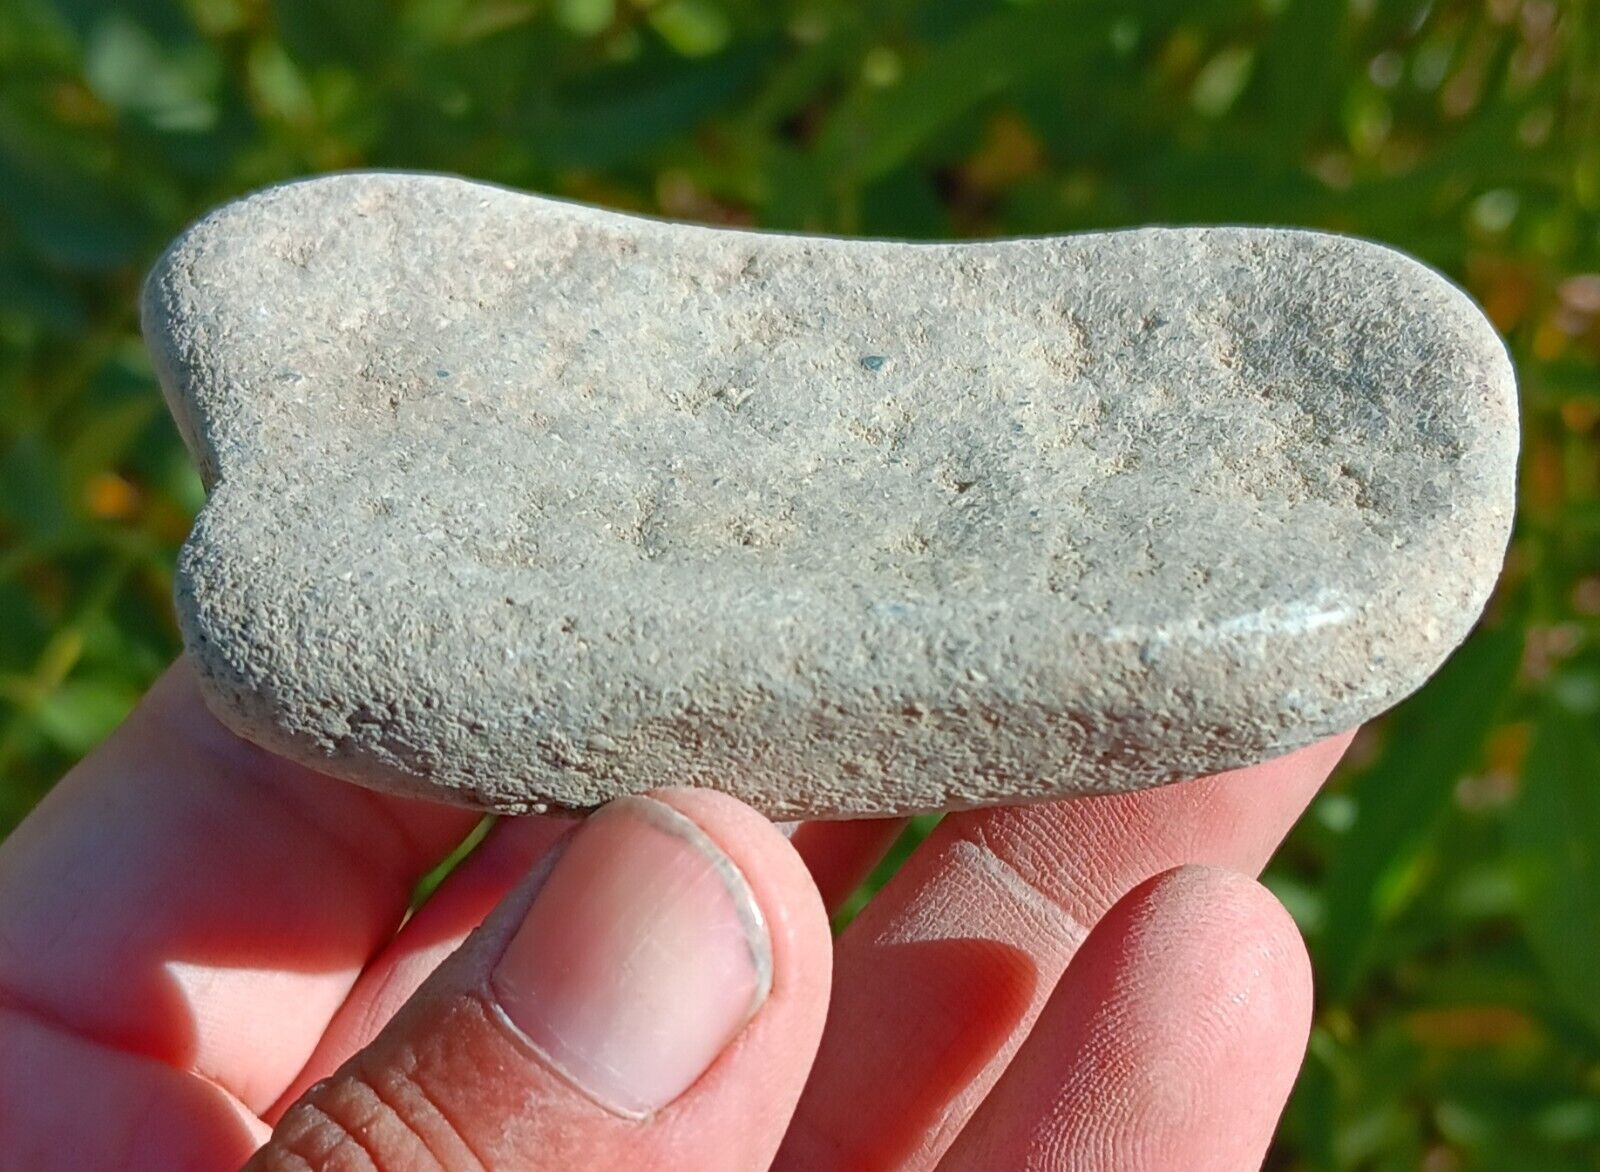 Mortar Anvil Stone Authentic Native American Indian Artifact Arrowheads